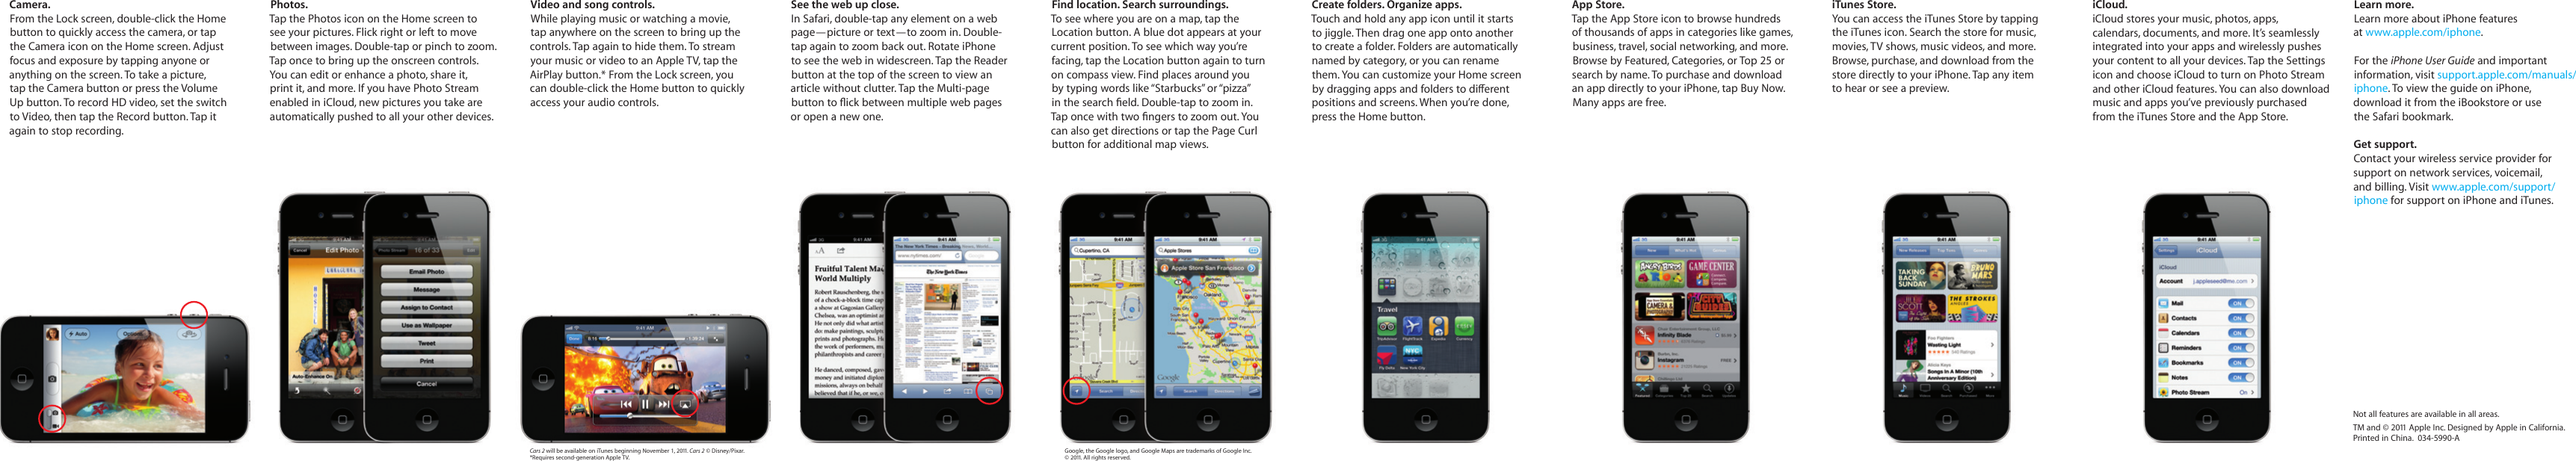 Page 2 of 2 - Apple IPhone4S User Manual I Phone4SFinger Tips-Quick Start Guide Iphone 4s Finger Tips